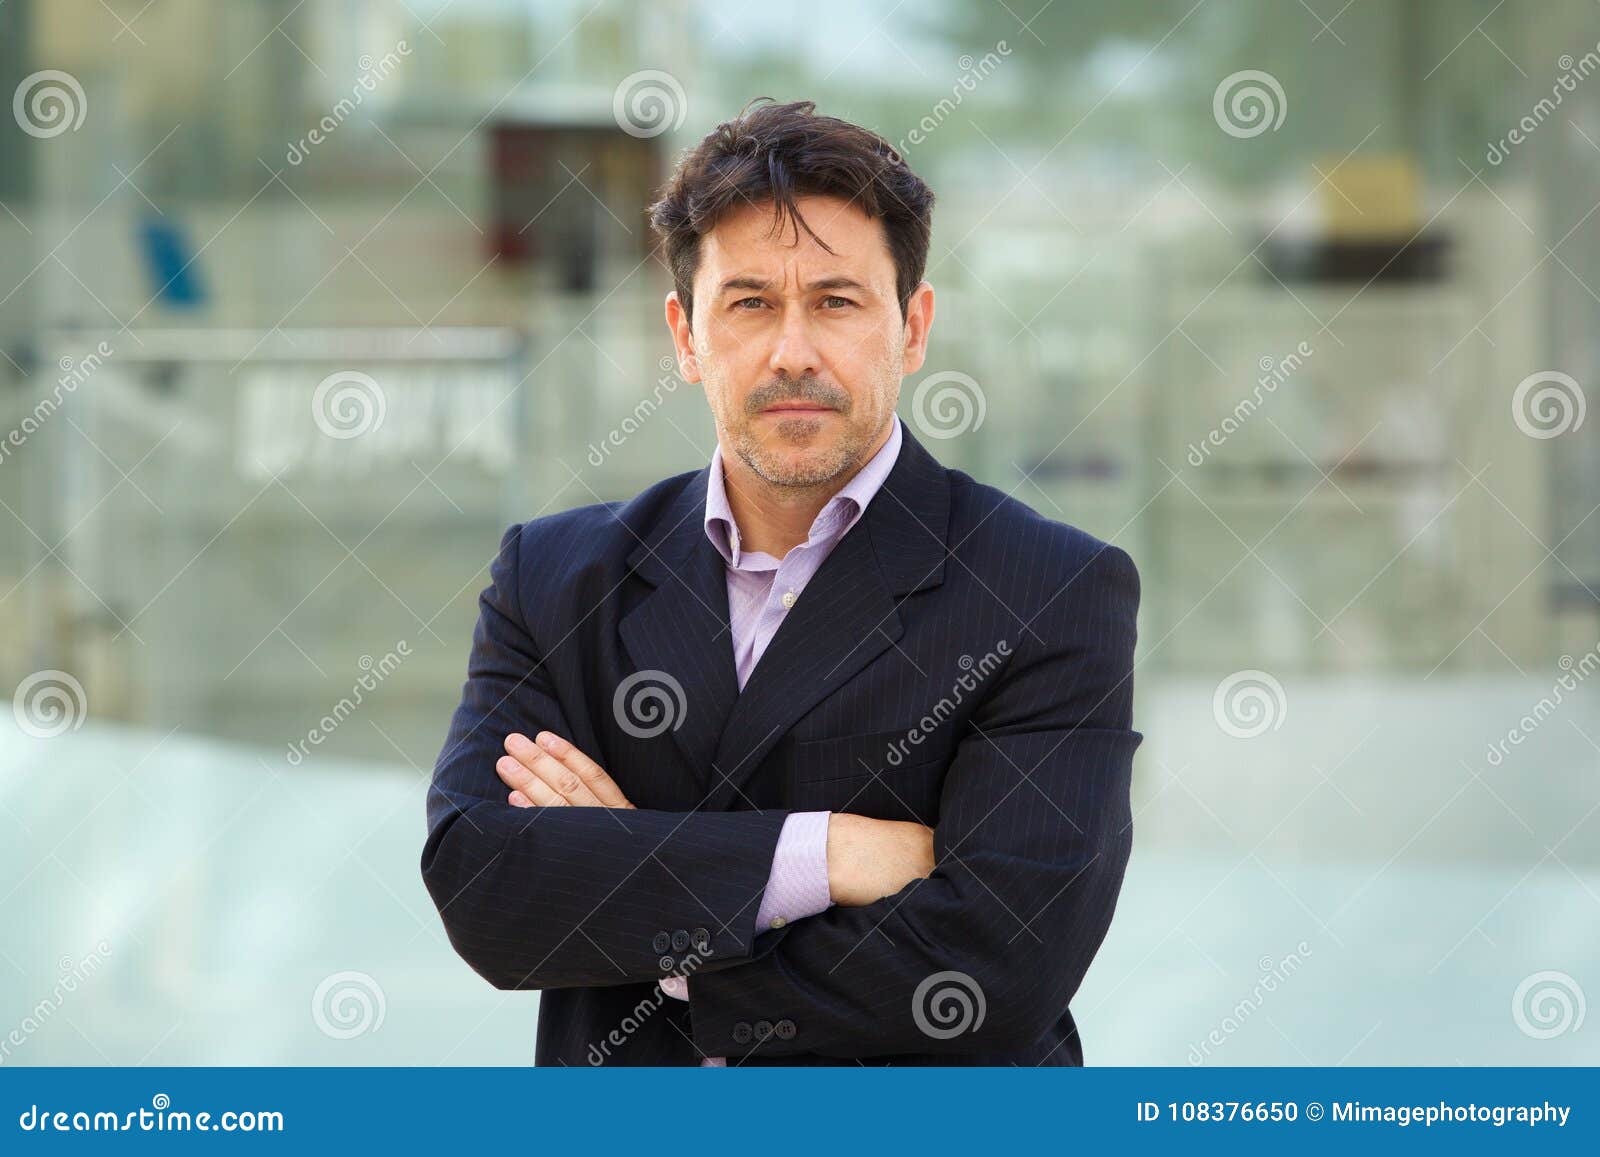 serious older man in business suit standing with arms crossed outdoors